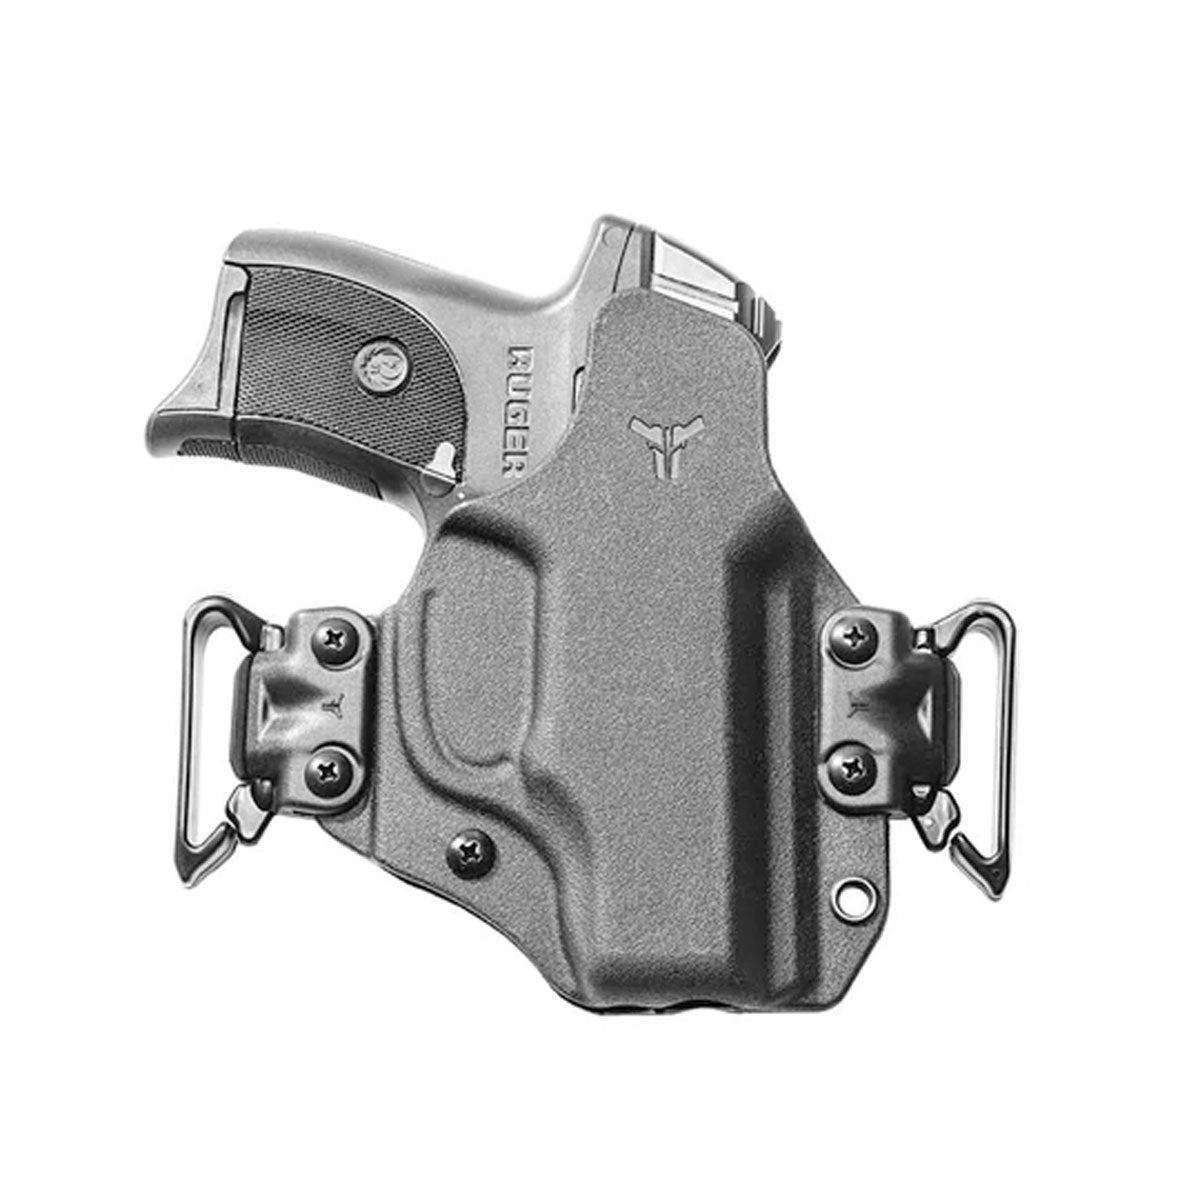 Blade-Tech Total Eclipse 2.0 Modular Holster Holsters Blade-Tech Holsters Ruger - LC9 / LC9S Tactical Gear Supplier Tactical Distributors Australia